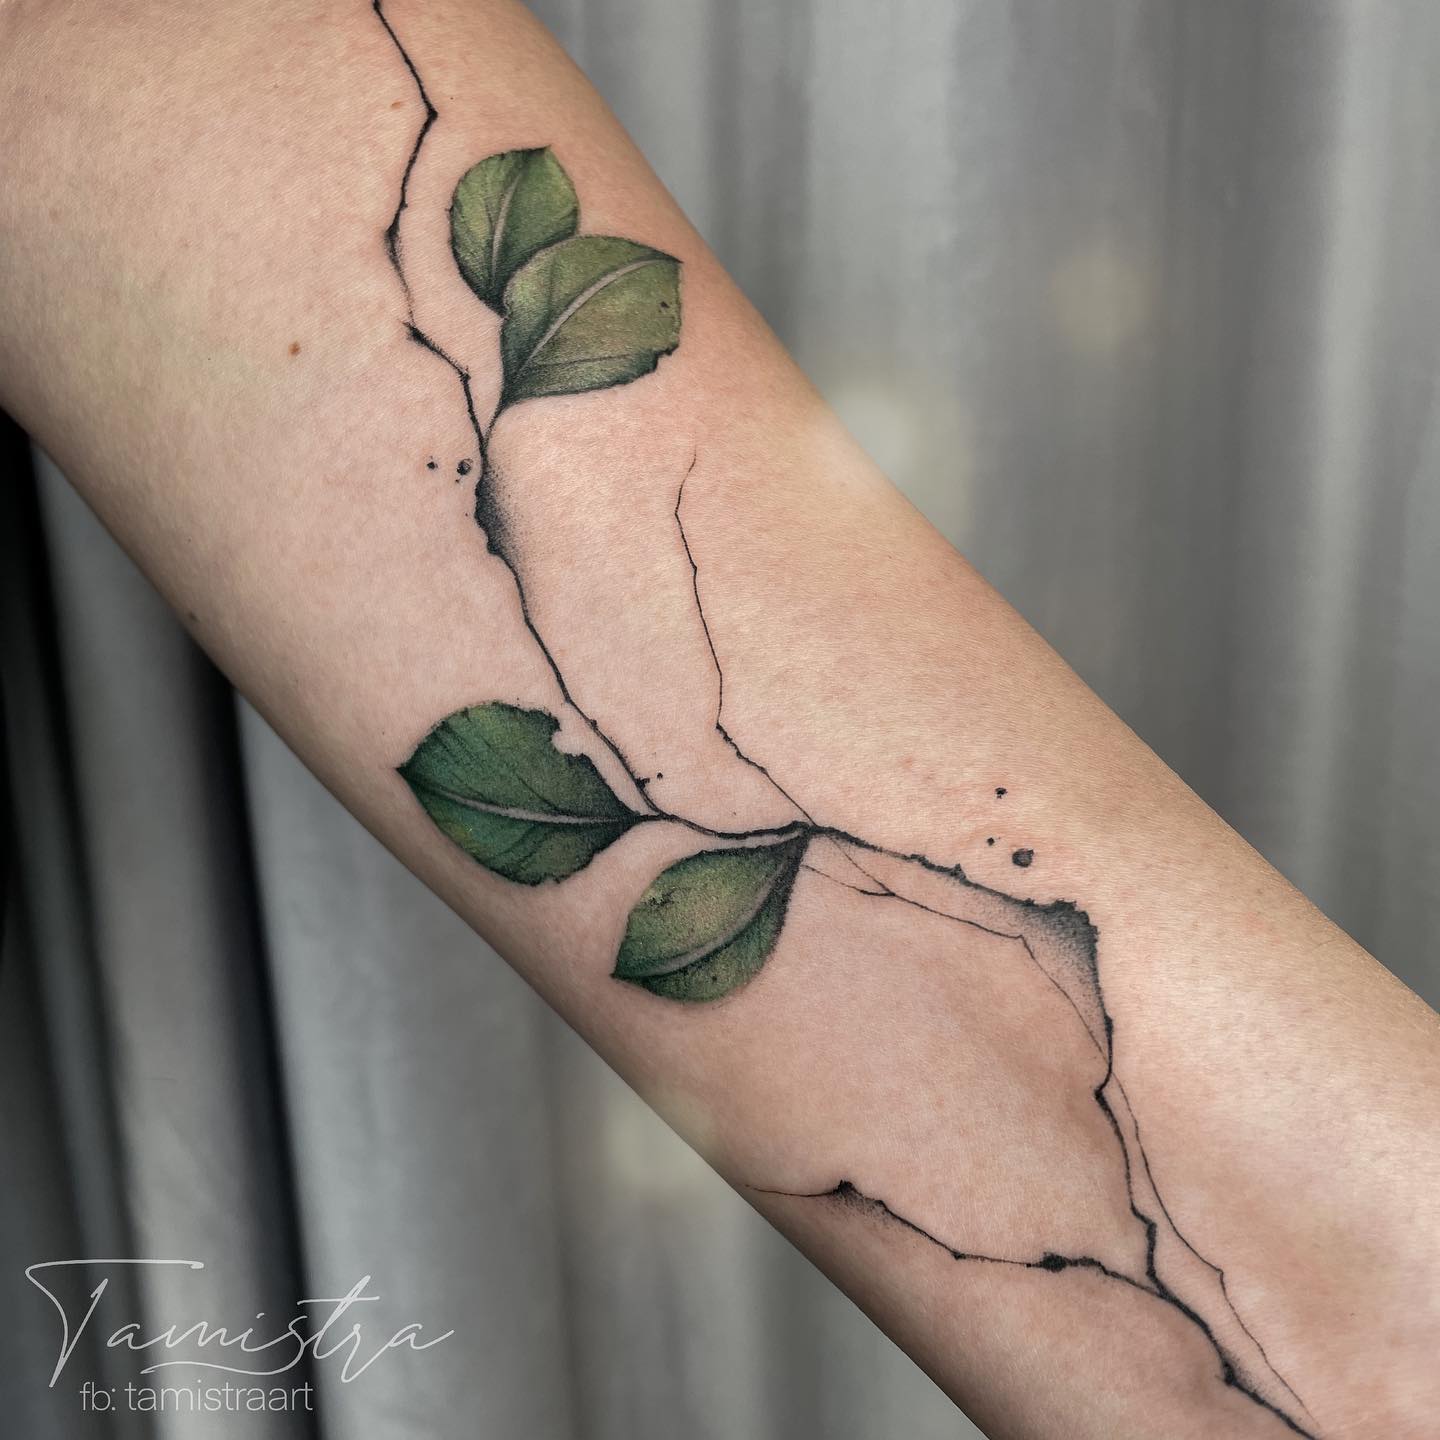 30+ Leaf Tattoos That Look Great on Any Piece of Skin - 100 Tattoos